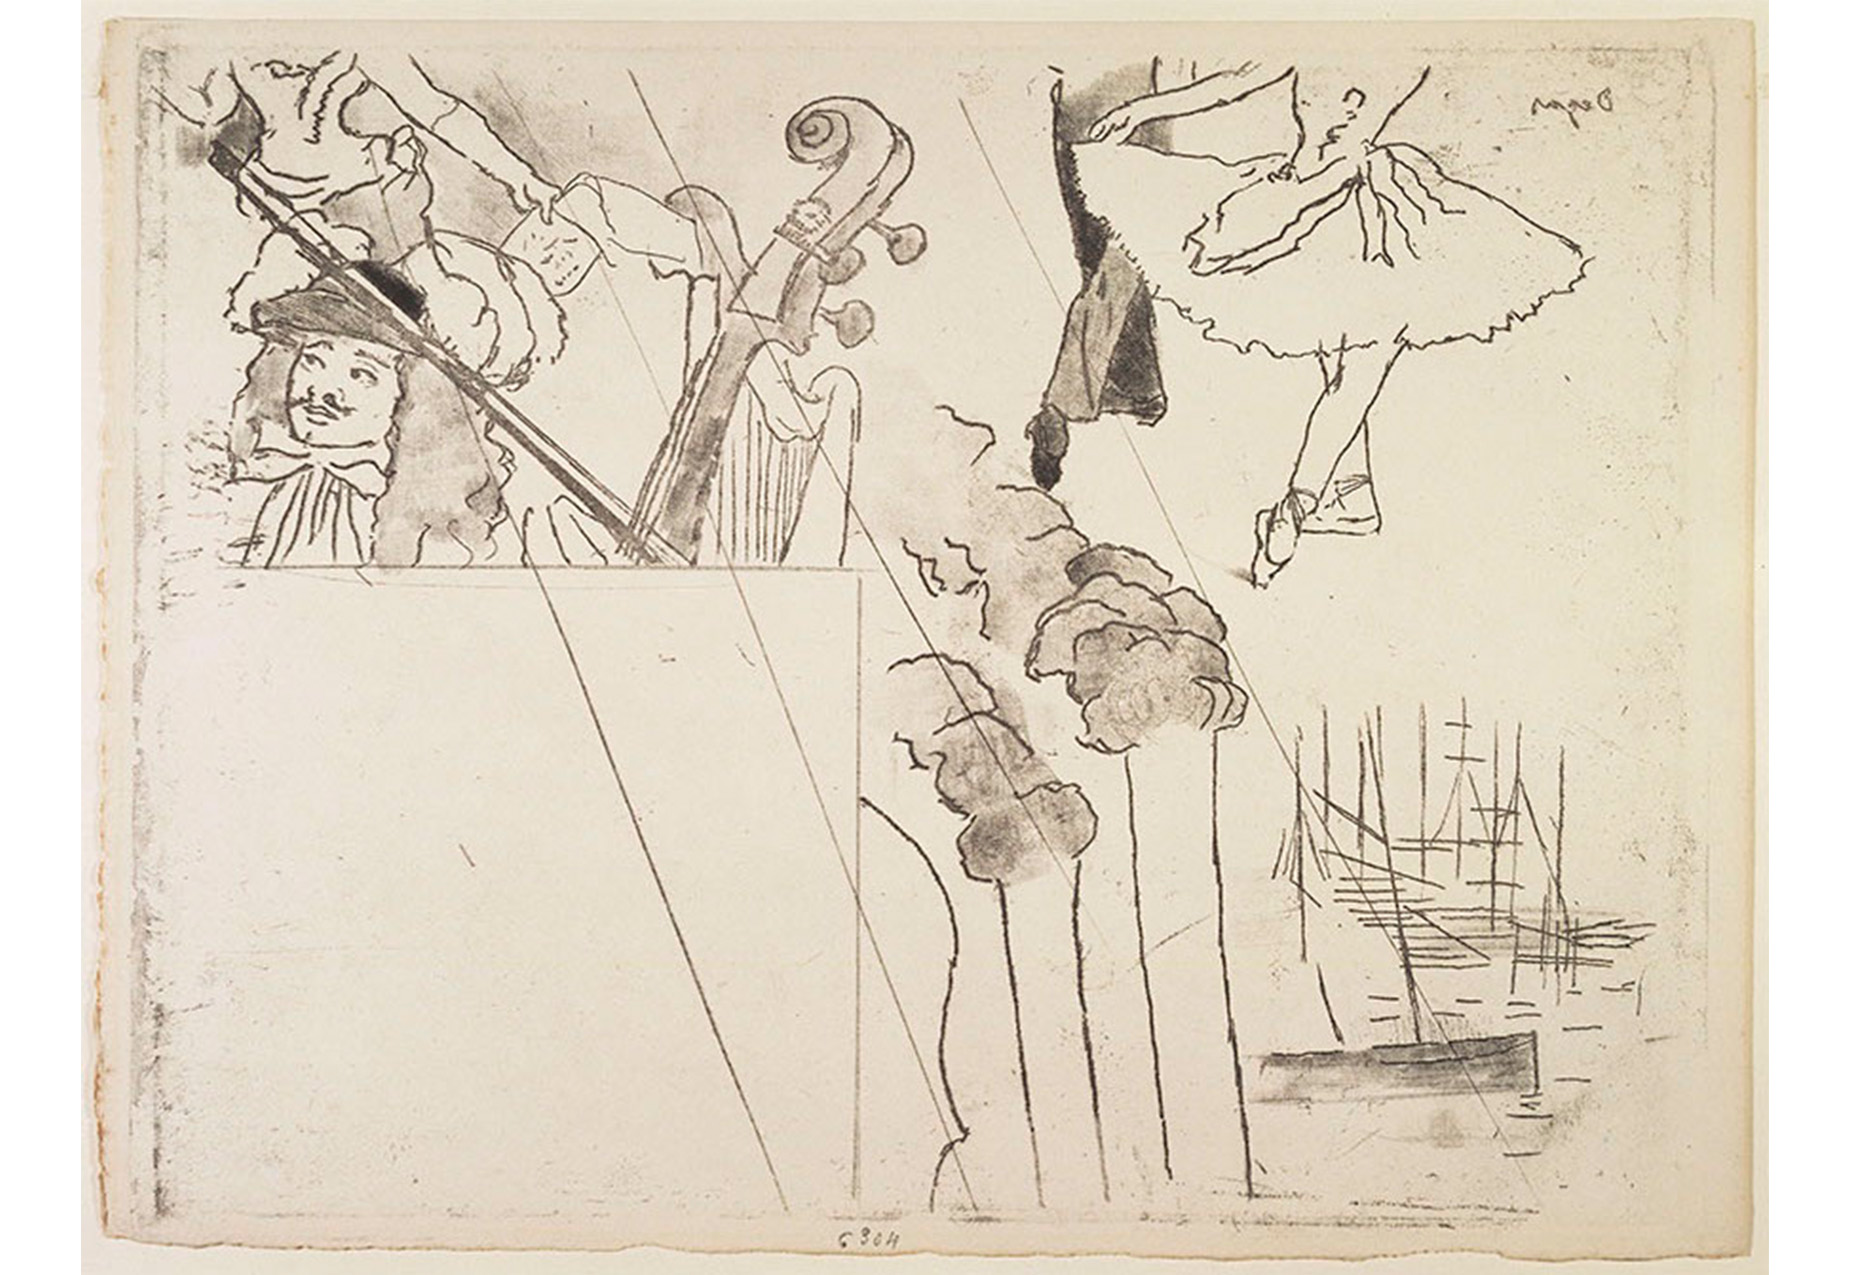 drawings of ballerina's feet and man playing a cello. empty white square in the bottom left corner